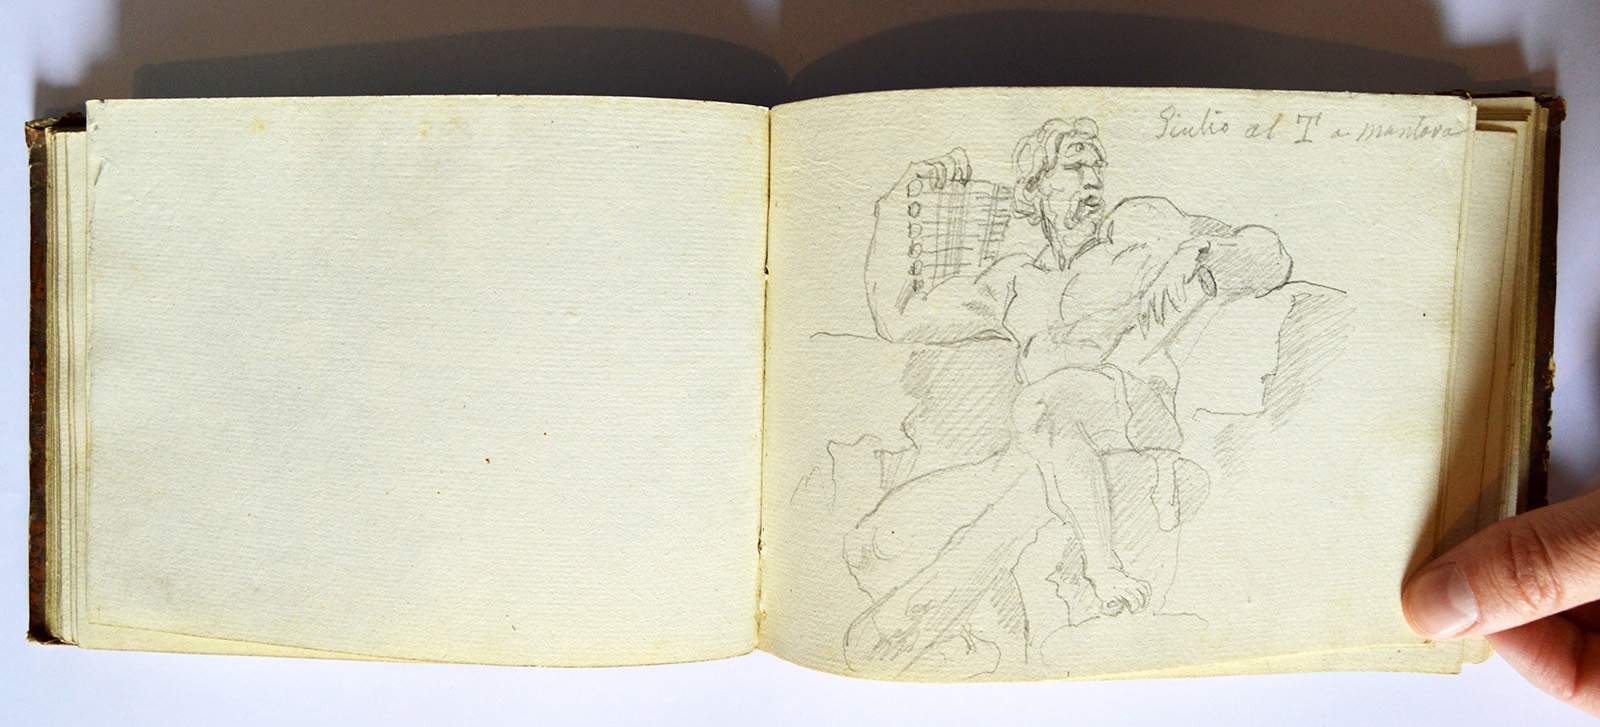 Mantua, precious 19th century notebook donated to Ducal Palace: who will be the author?